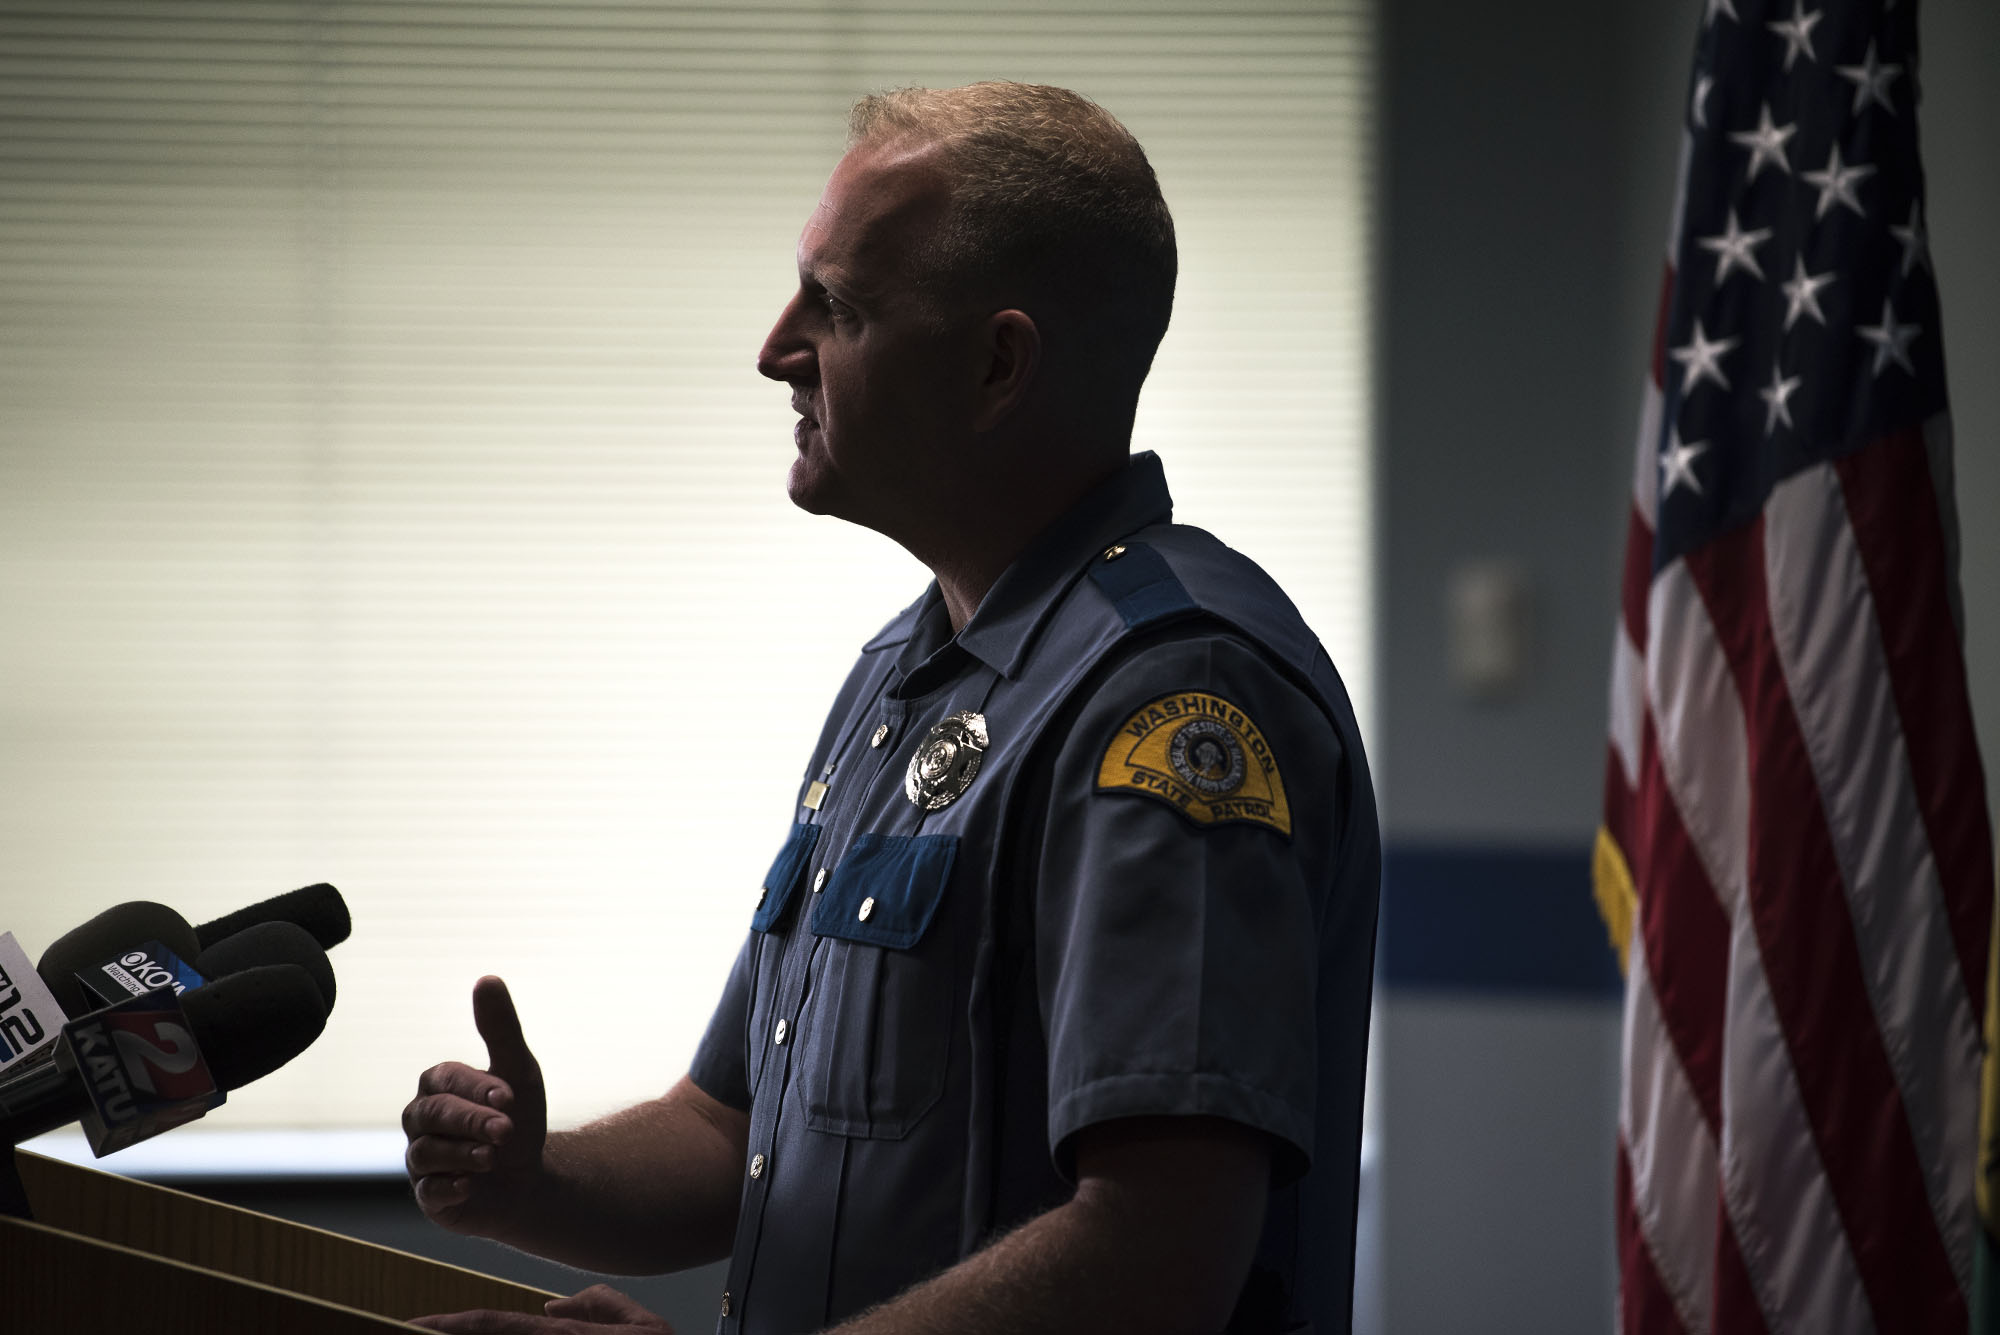 Trooper Will Finn with the Washington State Patrol speaks about the June 9 fatal shooting on Highway 503 during a press conference at WSP headquarters on Monday afternoon.